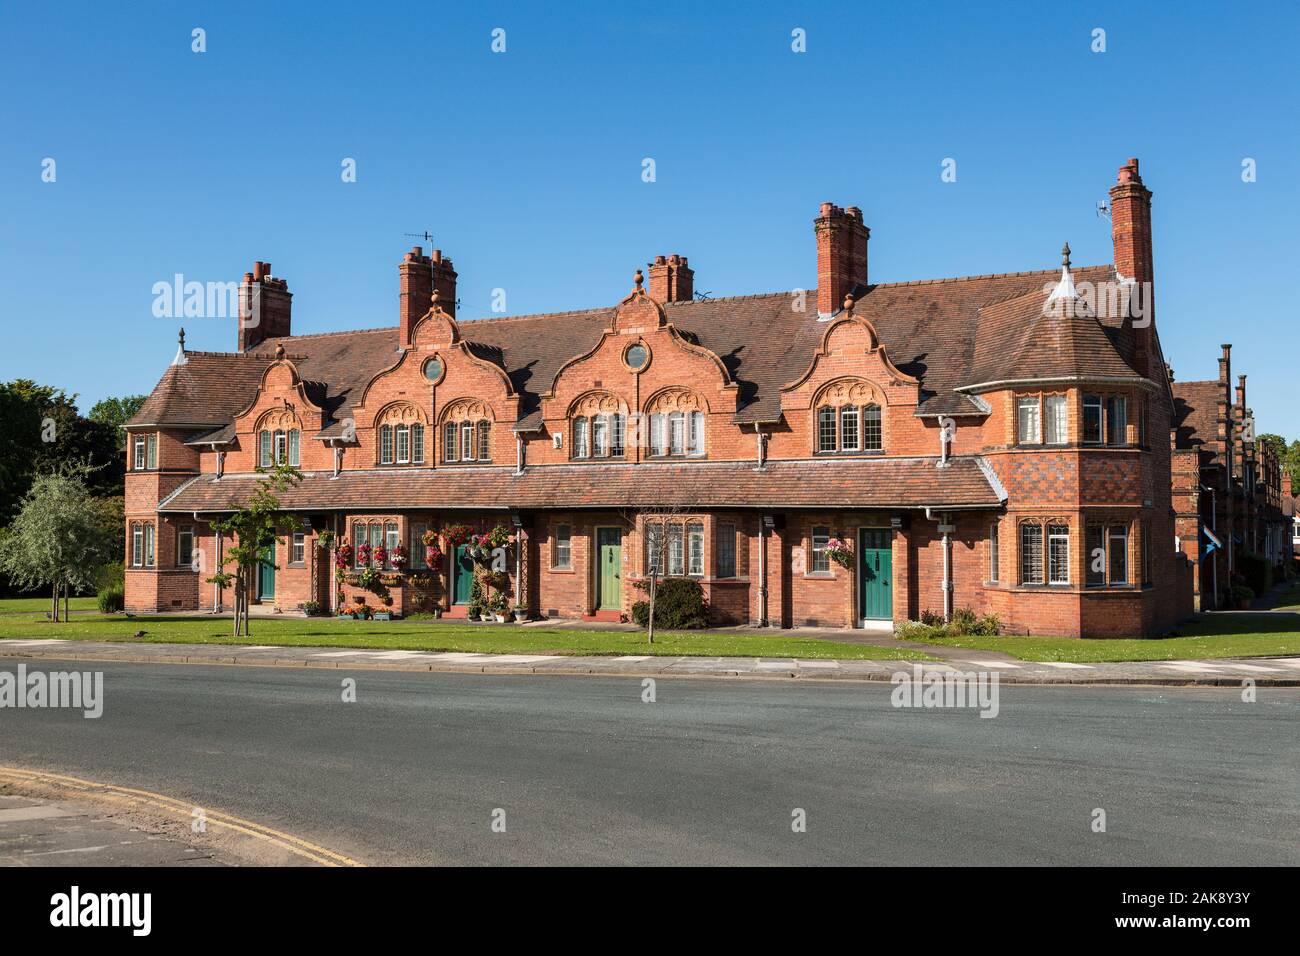 Chimney pots, Arts and Crafts style houses in Port Sunlight, Wirral, England Stock Photo